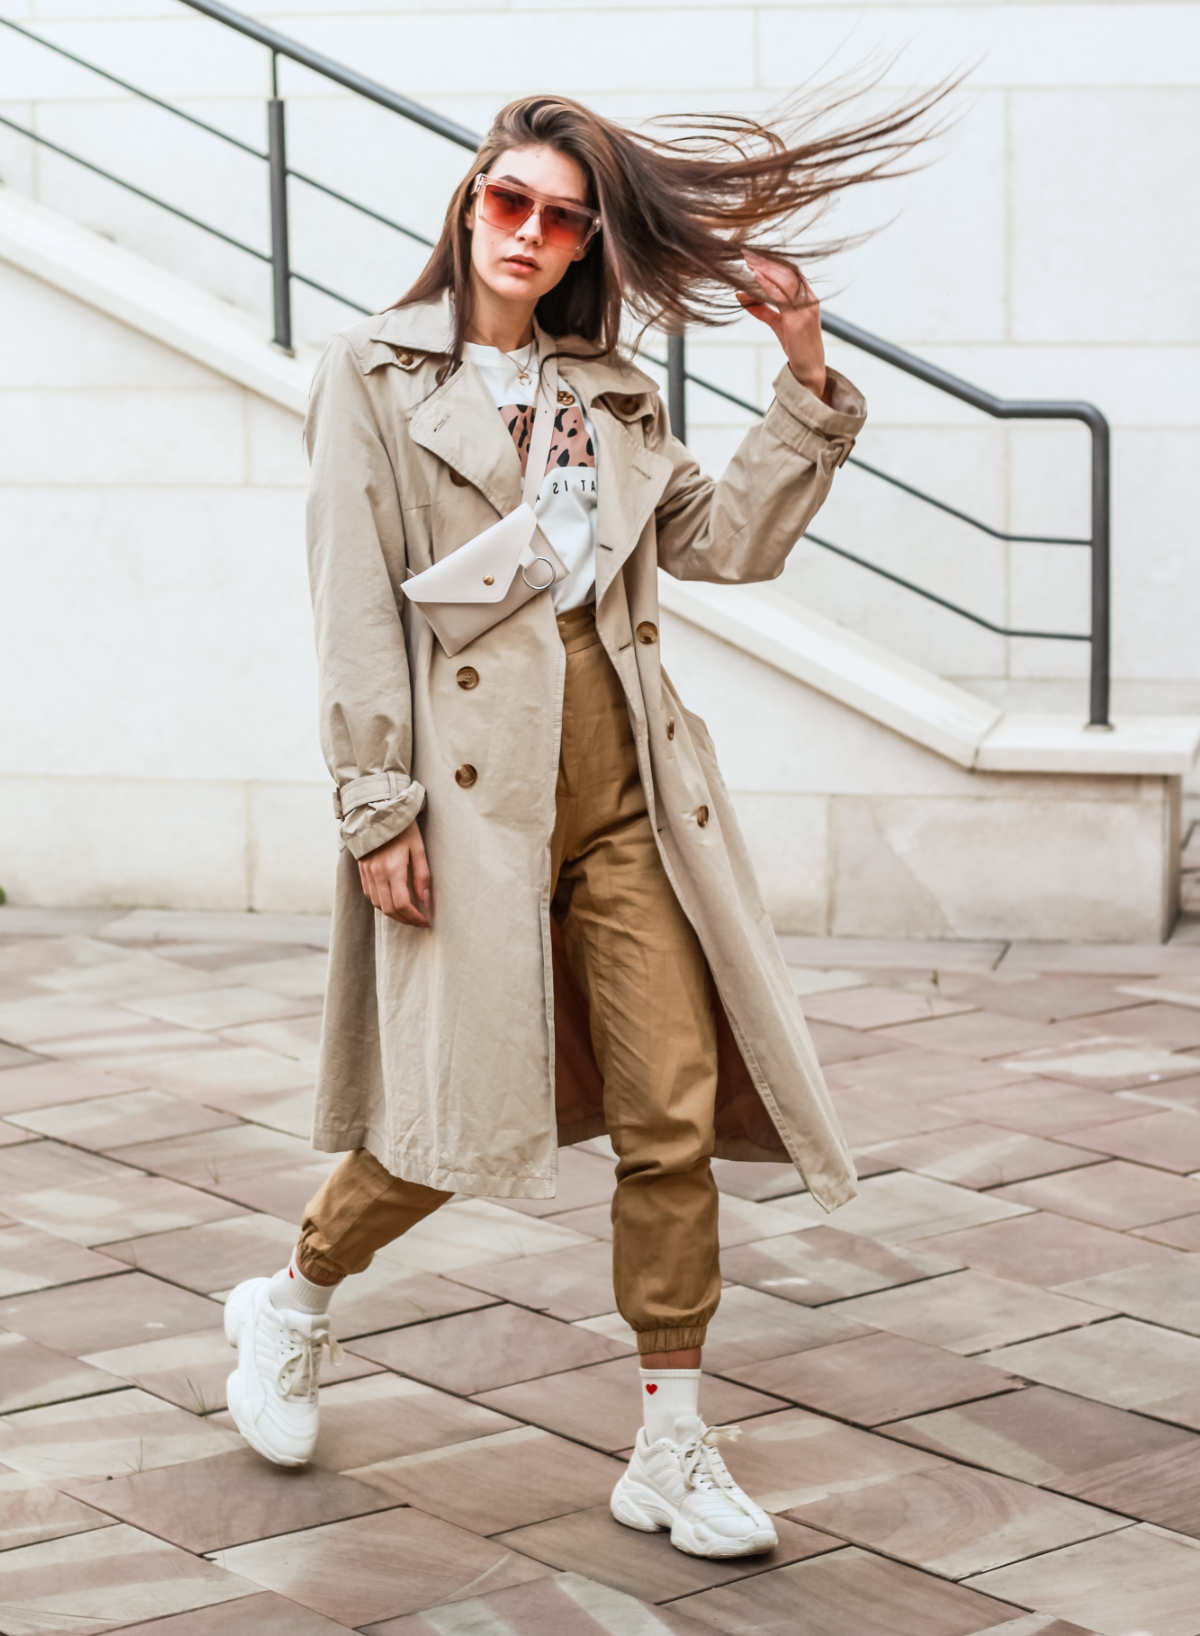 Woman walking wearing tan joggers with sneaker shoes, beige trench and red sunglasses and flipping her hair.